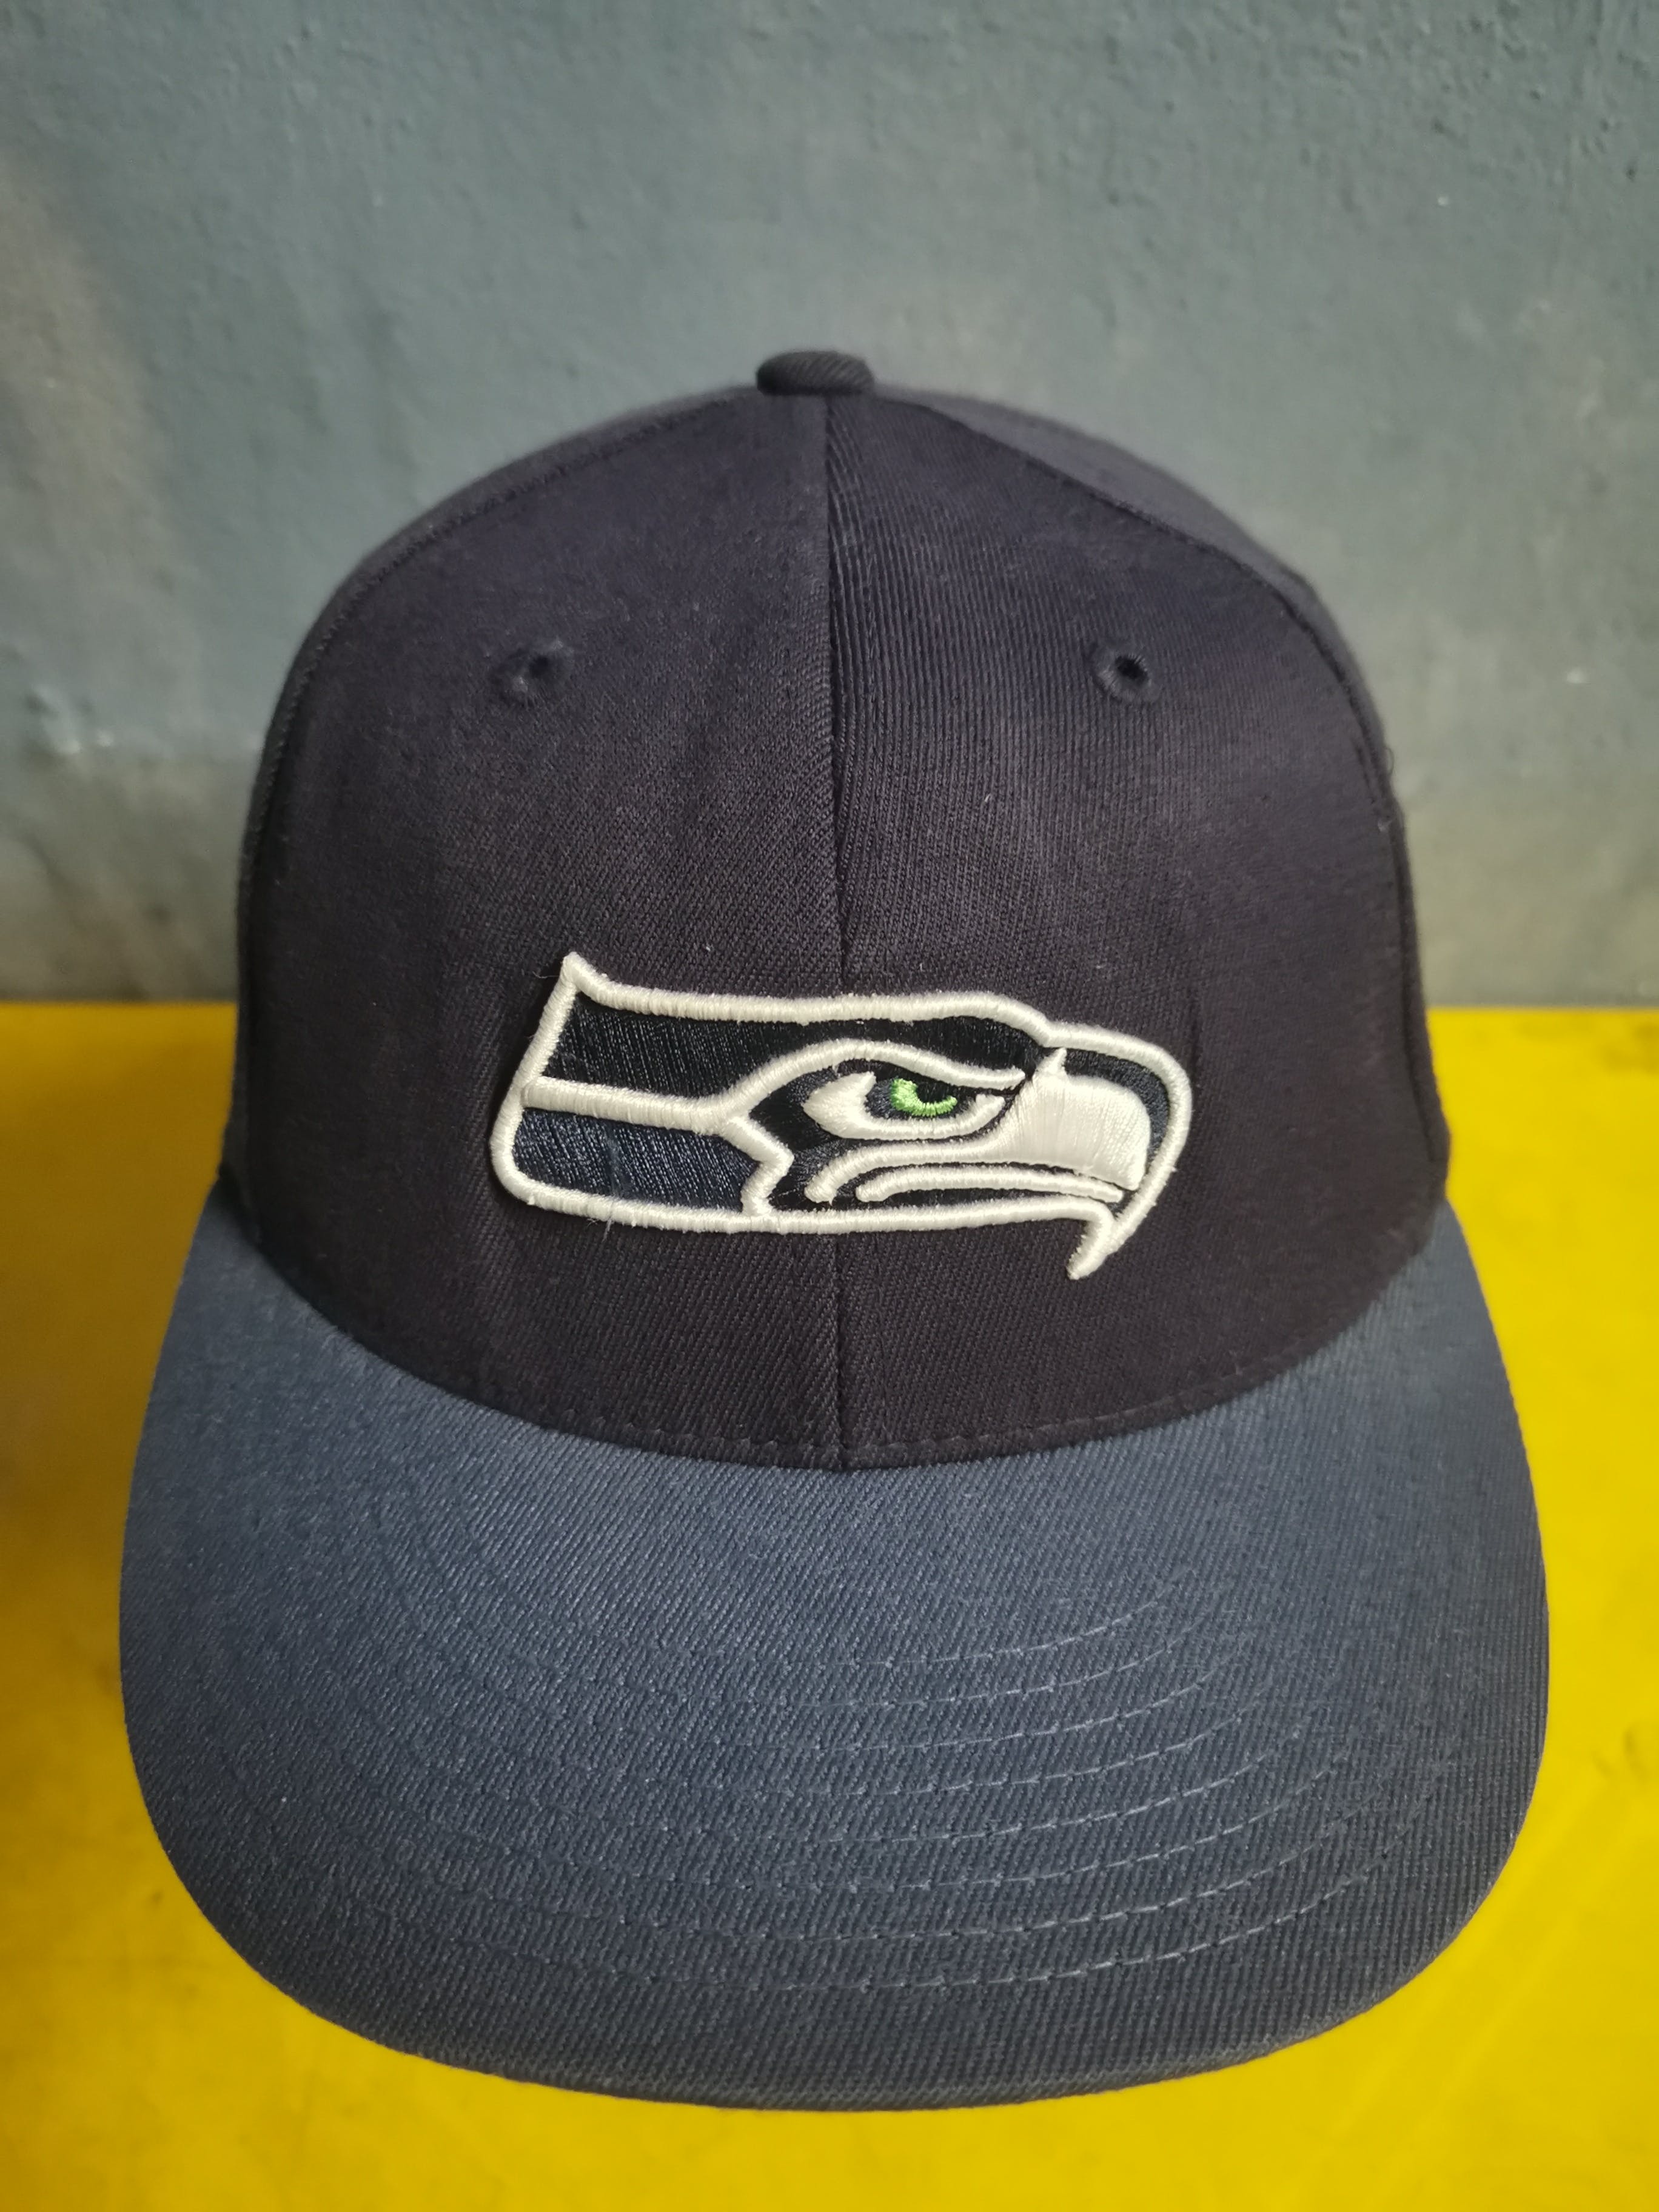 NFL Fullcap Embroidery By Team Apparel Reebok - 2